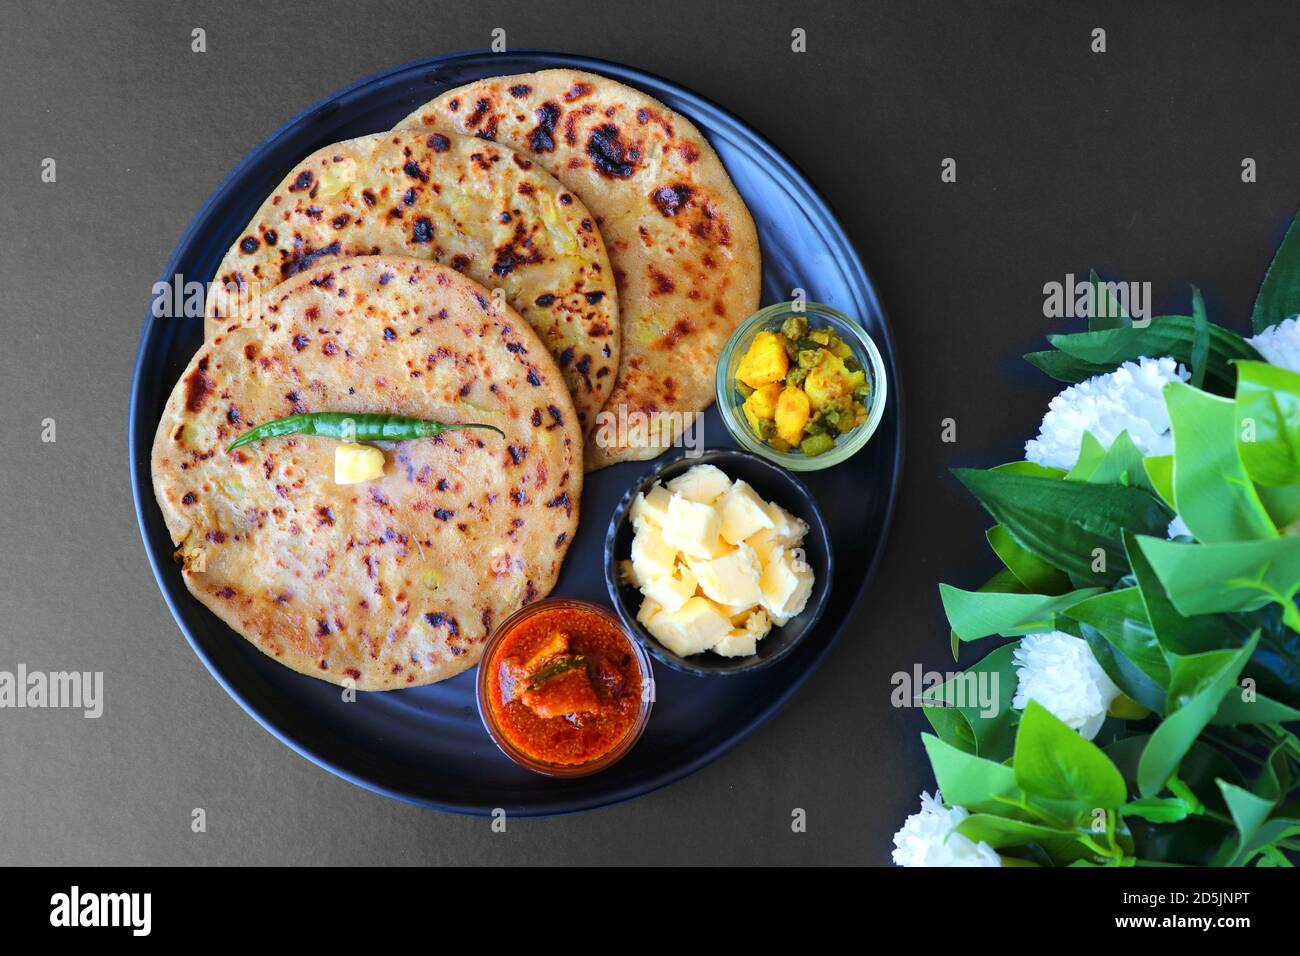 Aloo / Alu Paratha or Indian Potato stuffed Flatbread. Served with butter for breakfast, pickle and masala potatoes among with masala tea / chai. Stock Photo